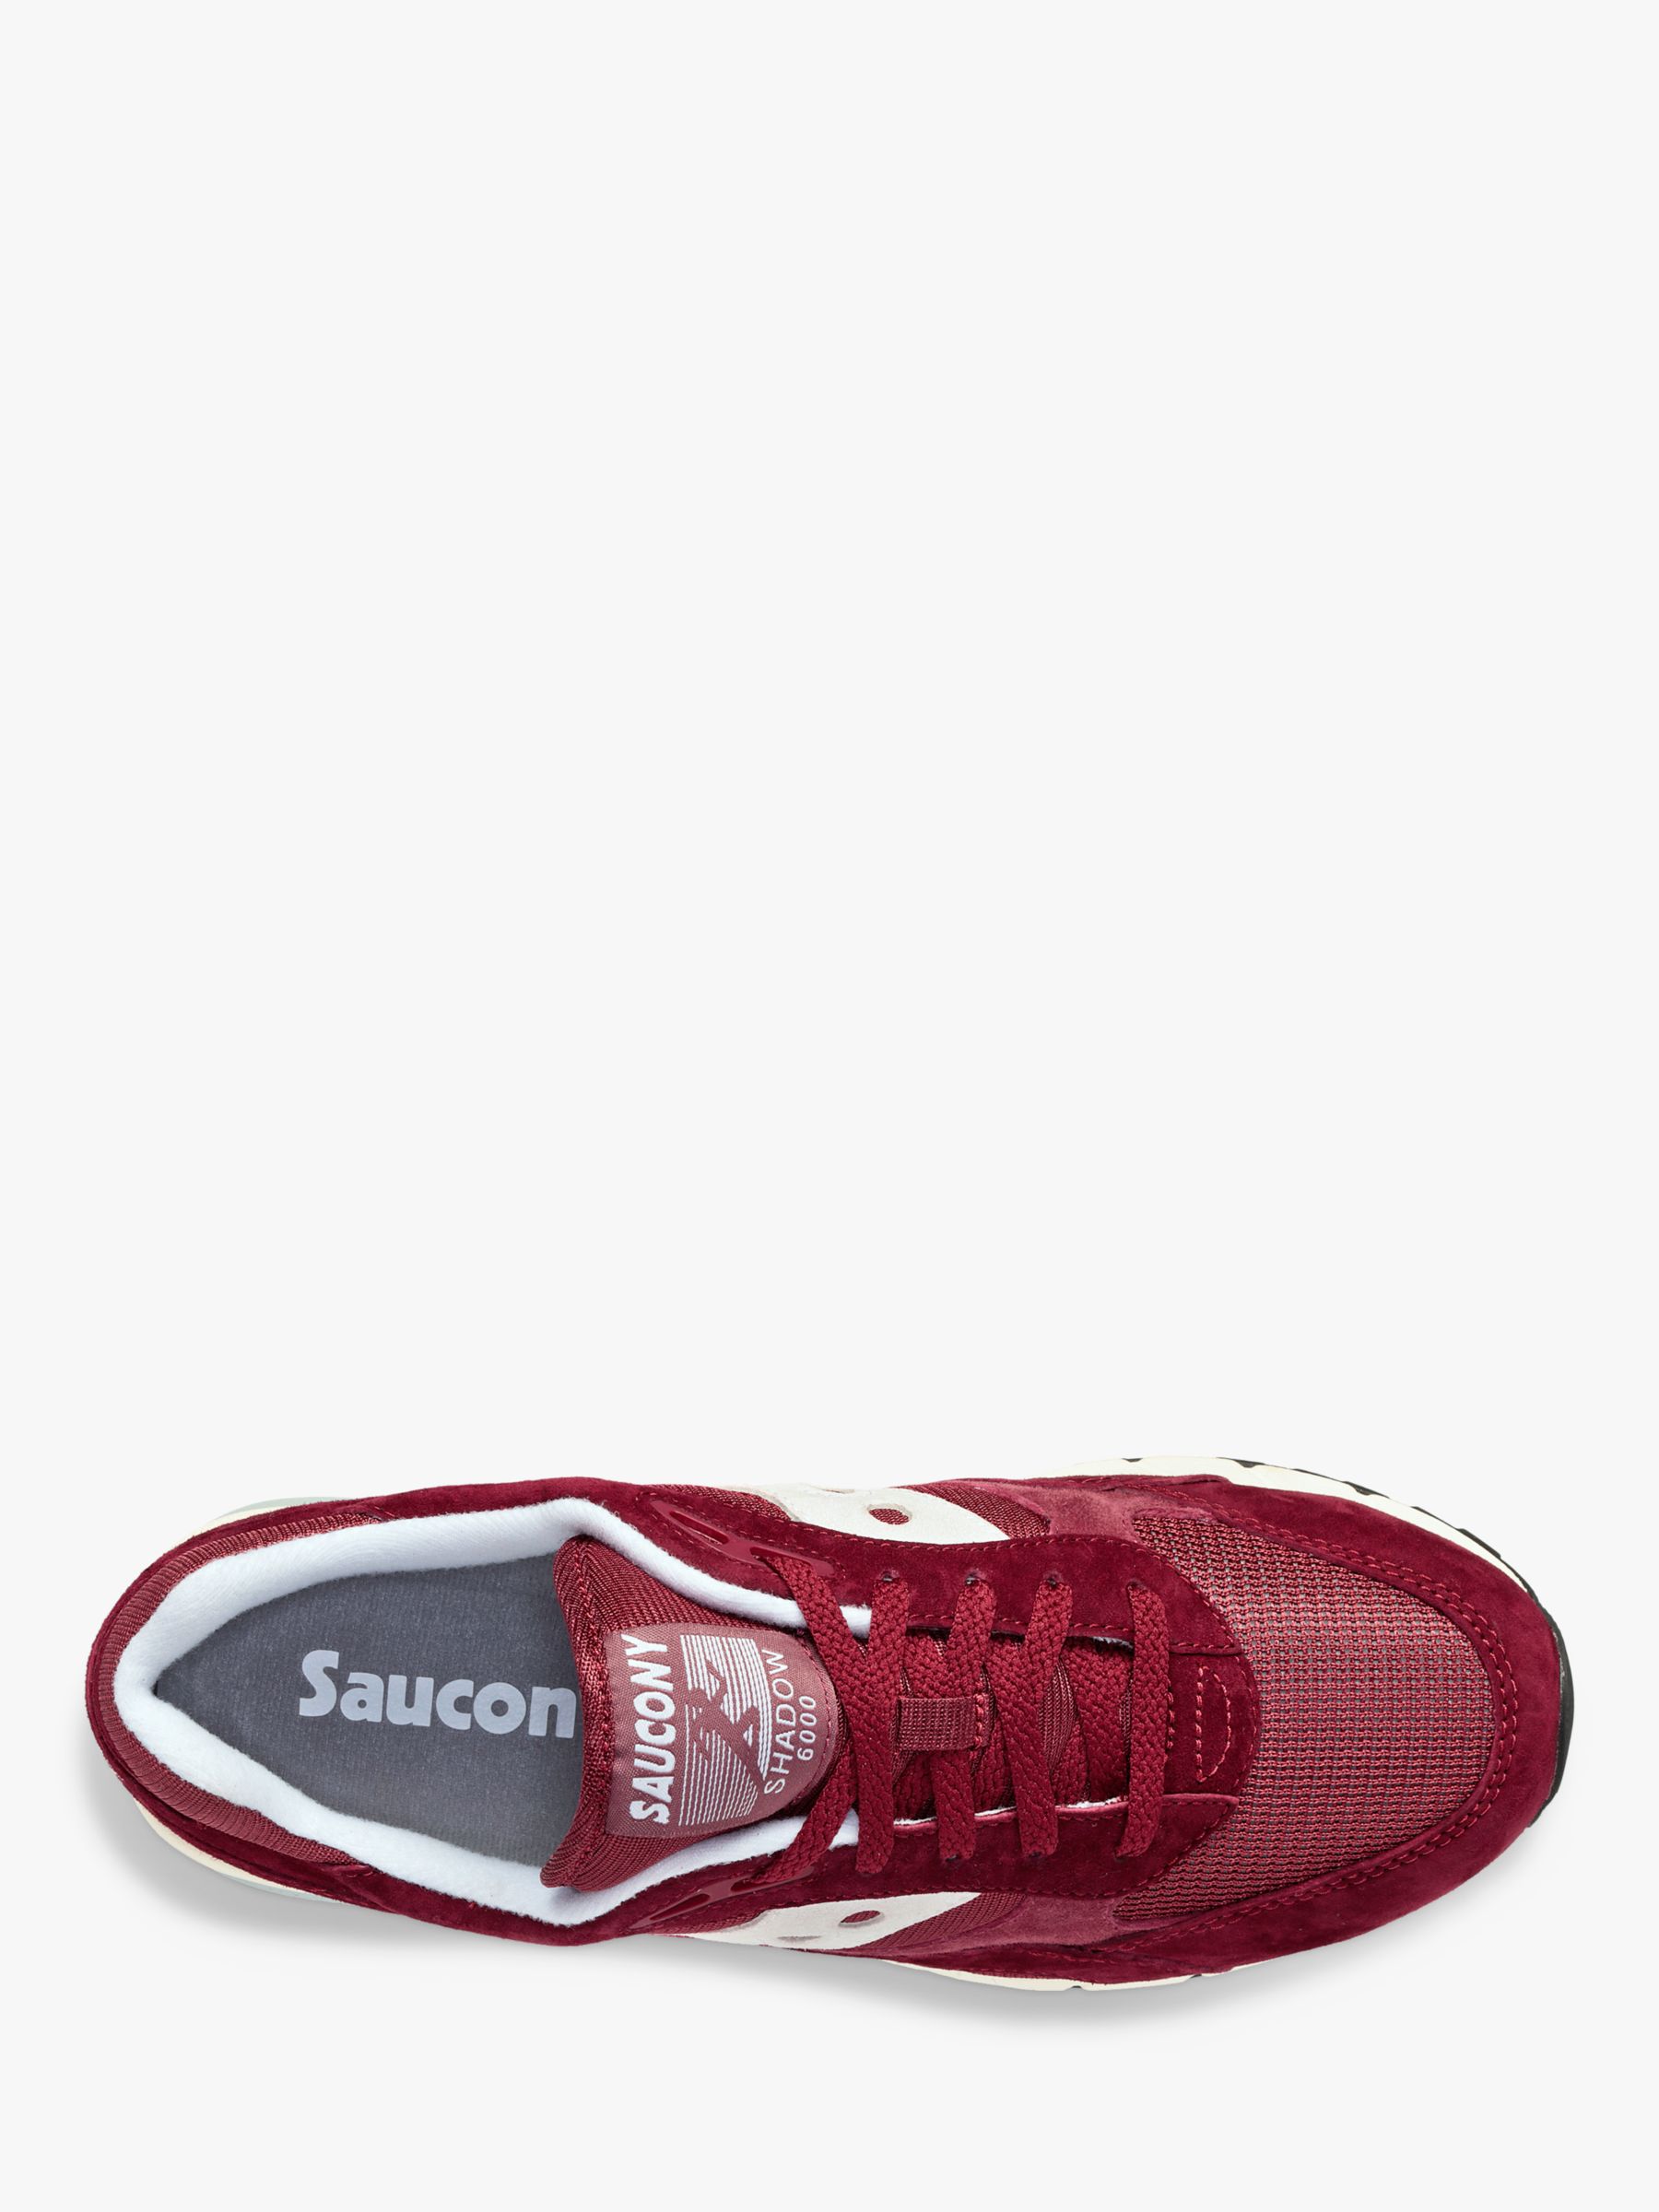 Saucony Shadow 6000 Lace Up Trainers, Burgundy, 7